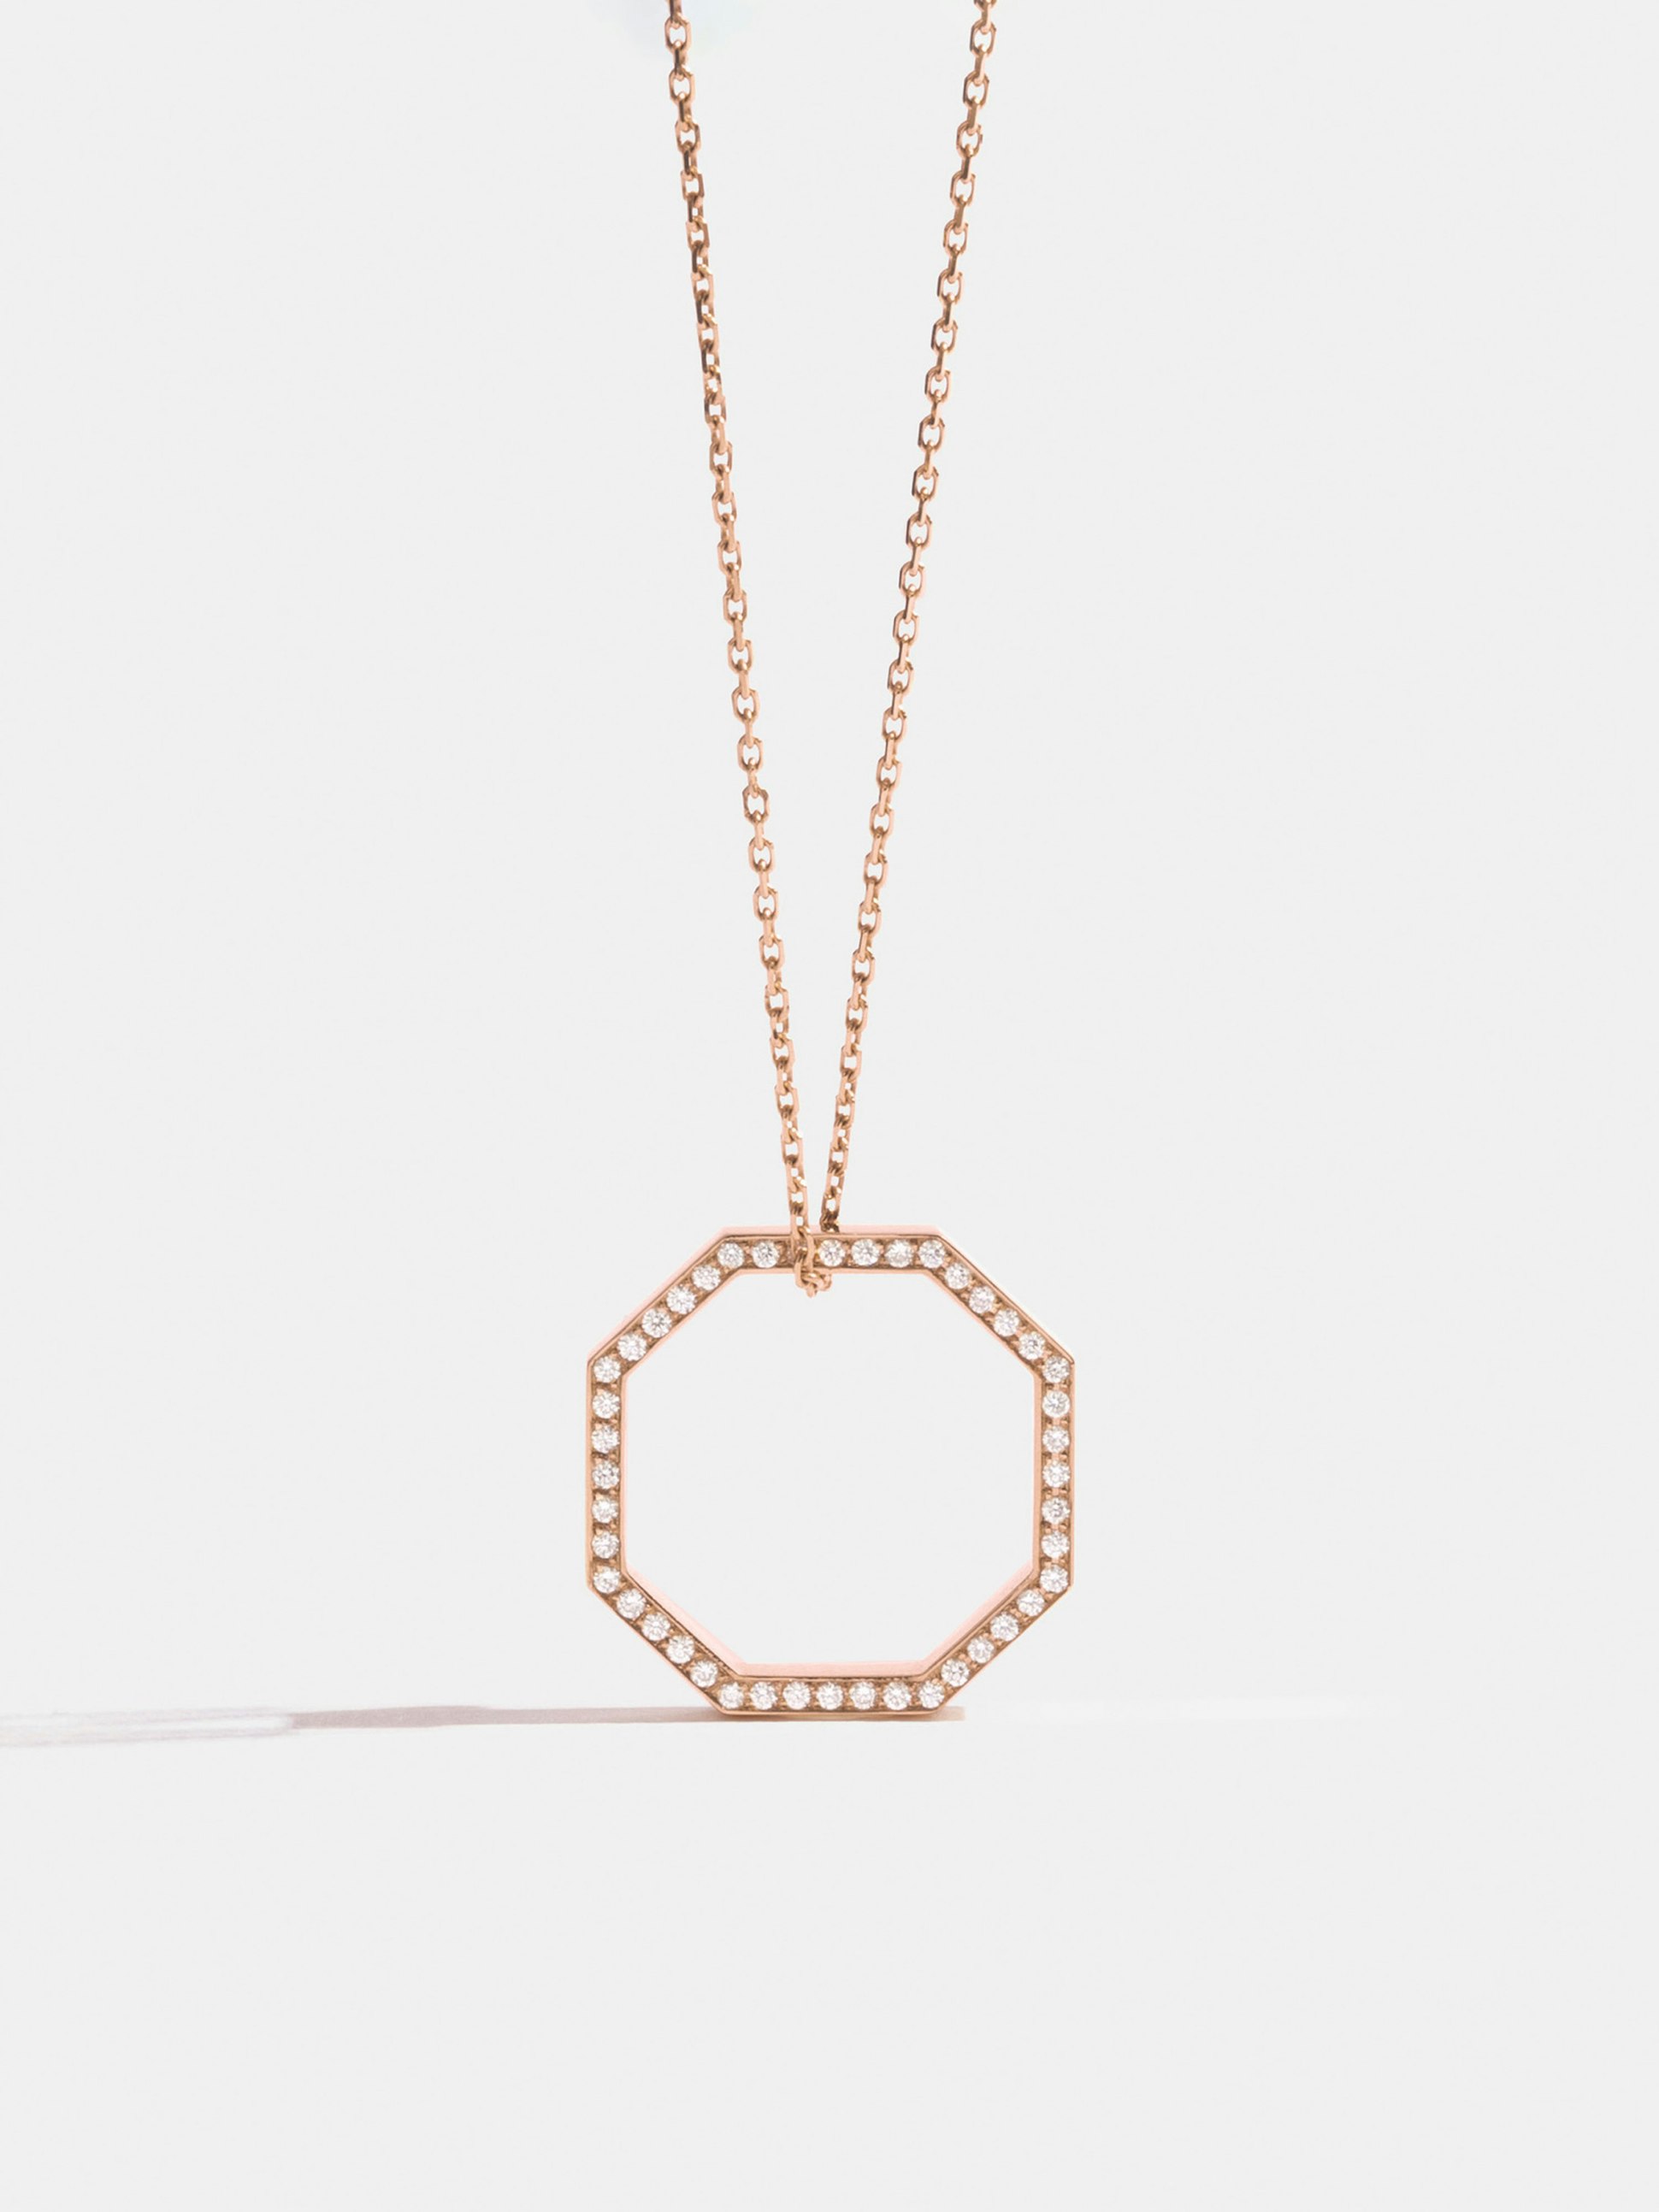 Octogone necklace with a 18mm pendant in 18k Fairmined ethical rose gold, paved with lab-grown diamonds, on a 88cm chain.